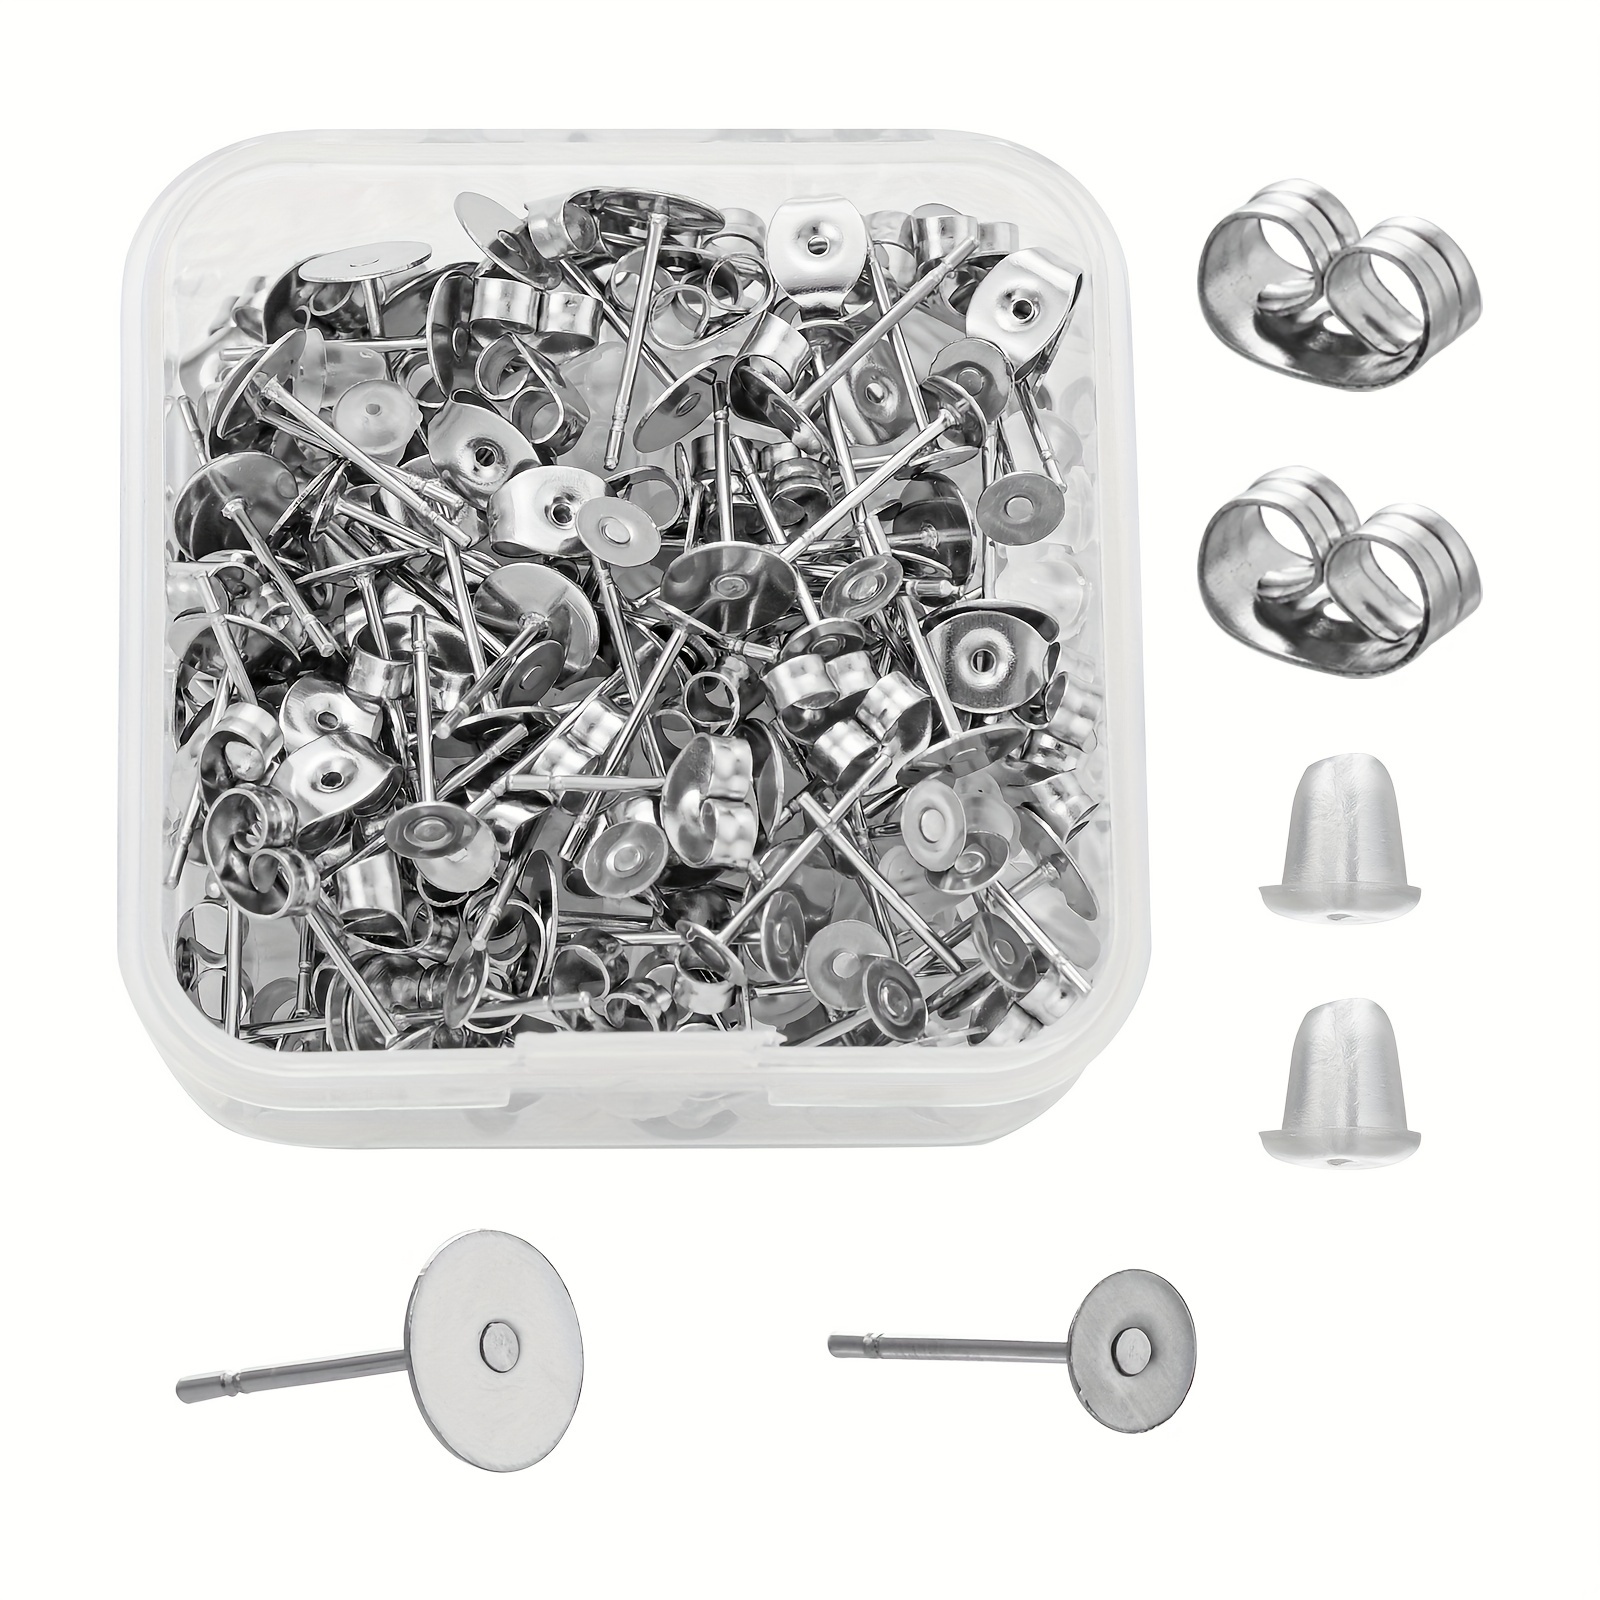 French Style 40mm Coiless Safety Pins for Bead Craft & Jewellery